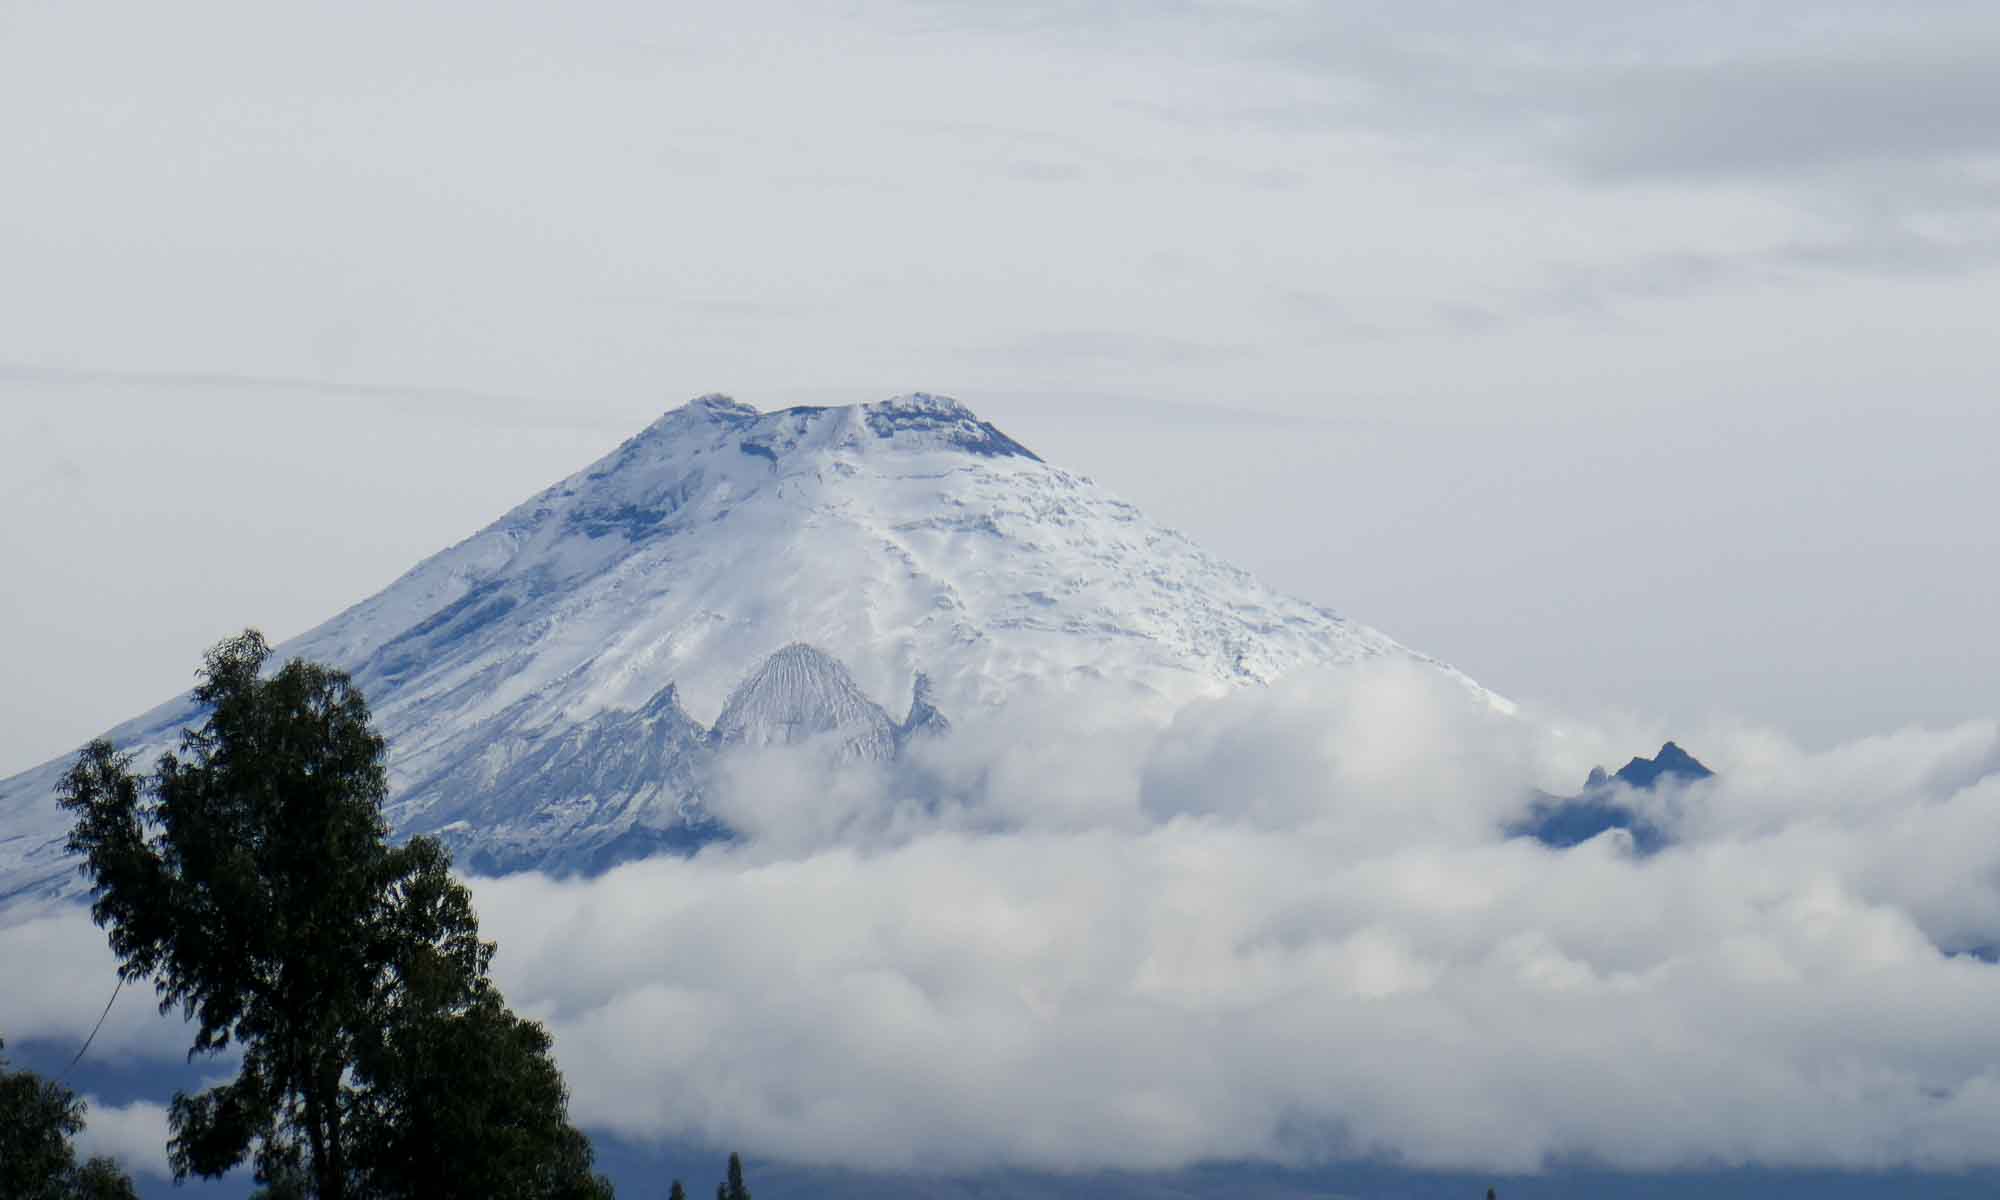 A clear view of the Cotopaxi Volcano summit